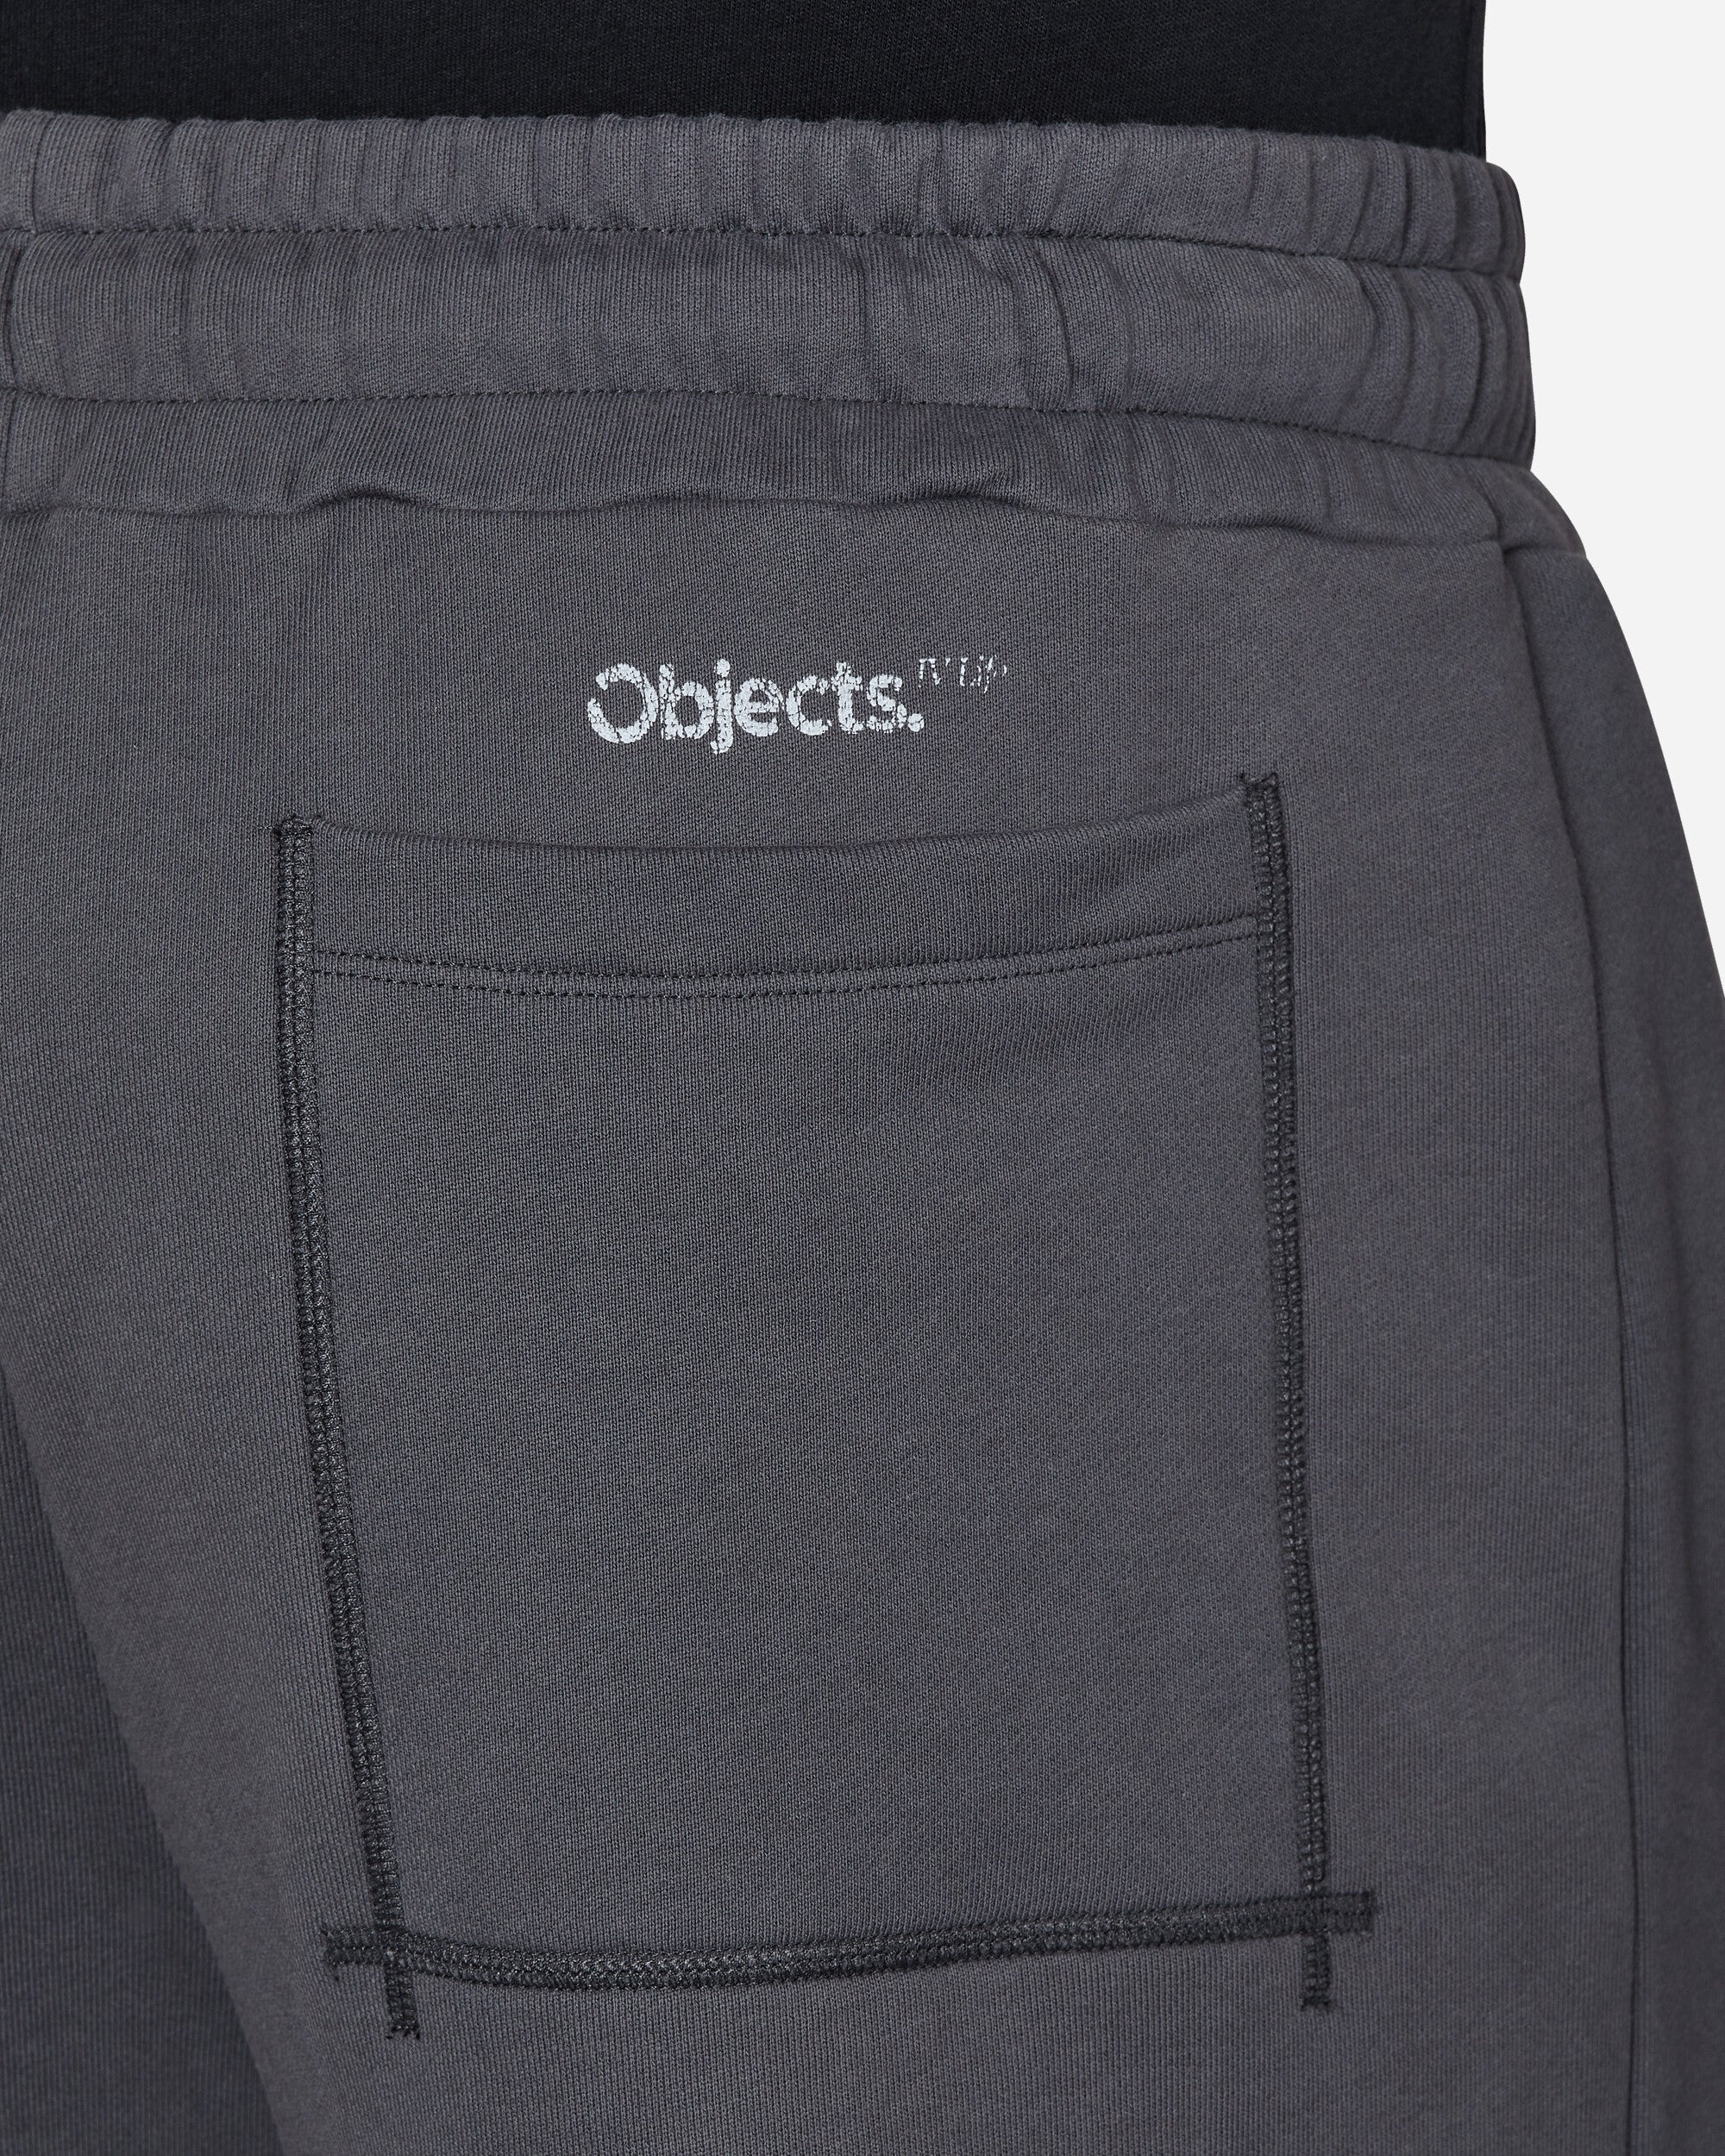 Objects IV Life Regular Fit Joggers Anthracite Grey Pants Sweatpants 002-113-02  ANTHGR 